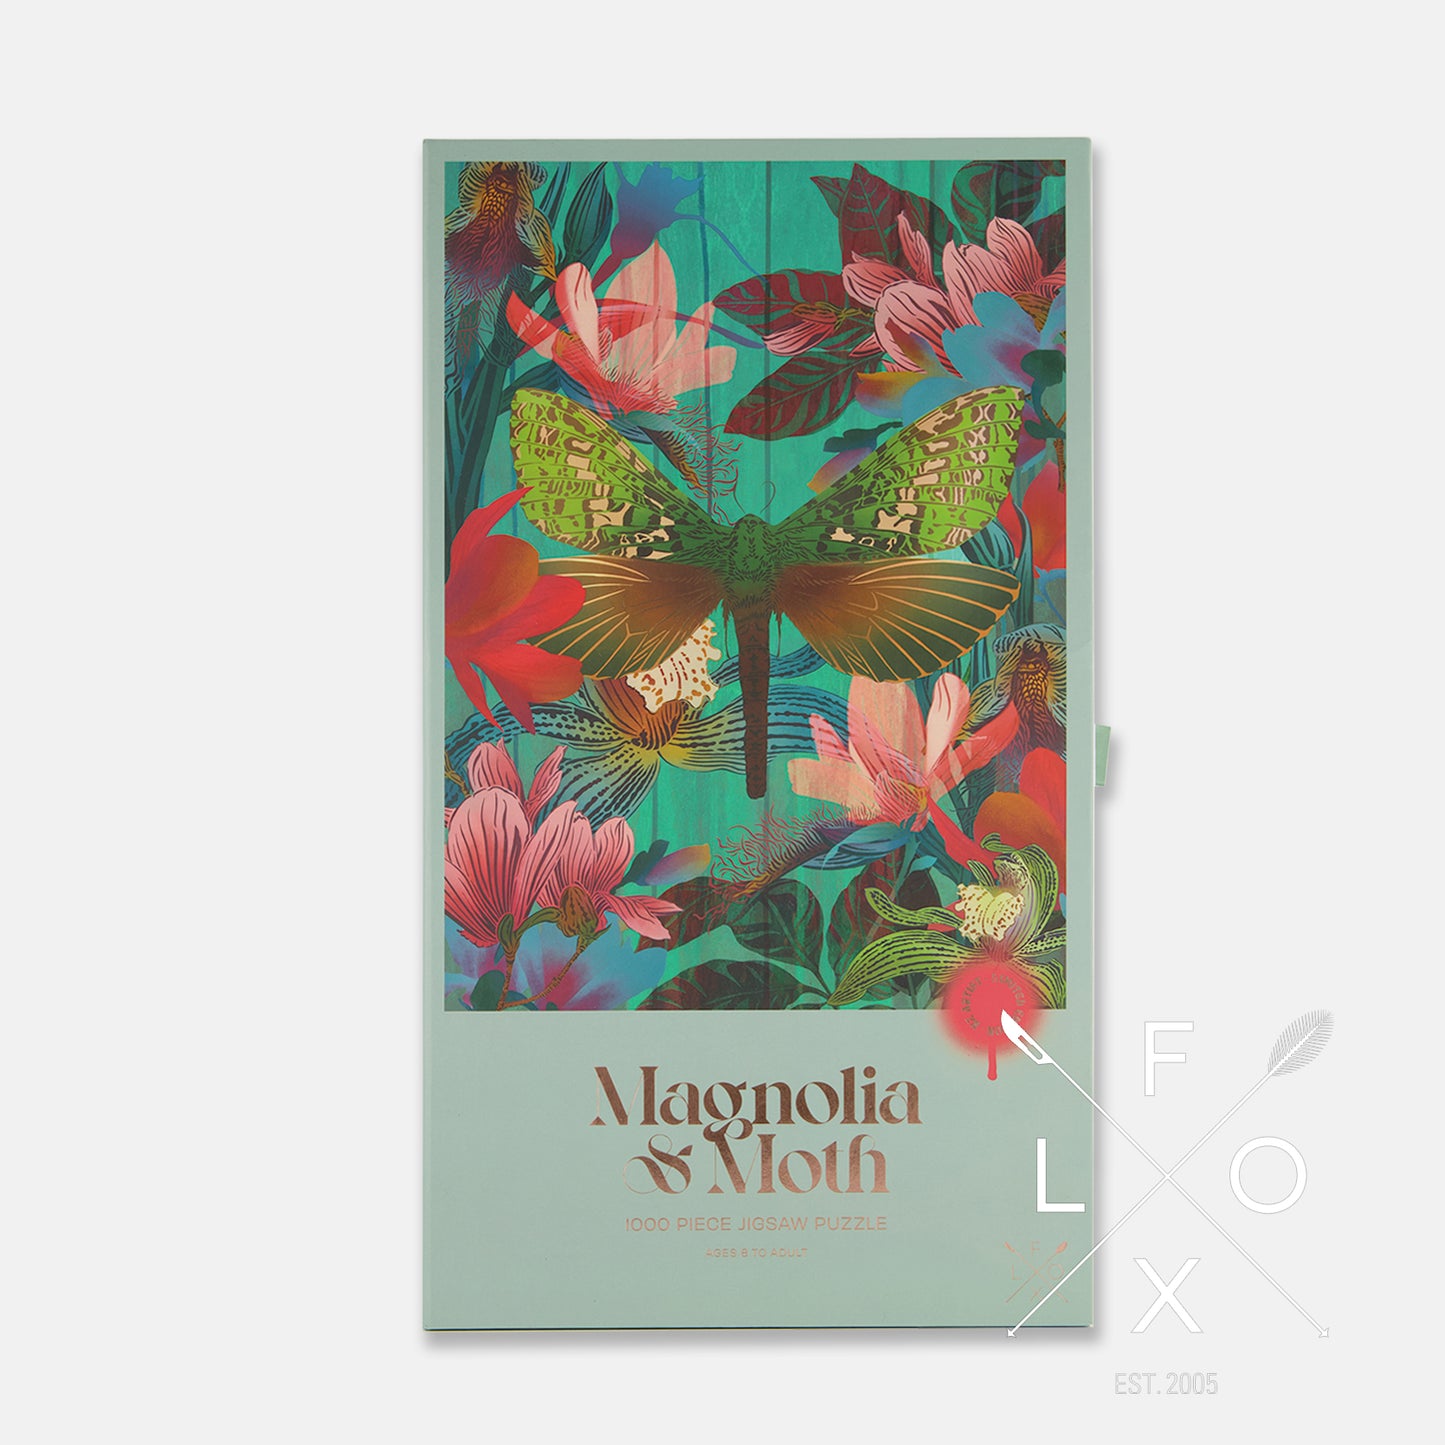 Magnolia and moth jigsaw puzzle.